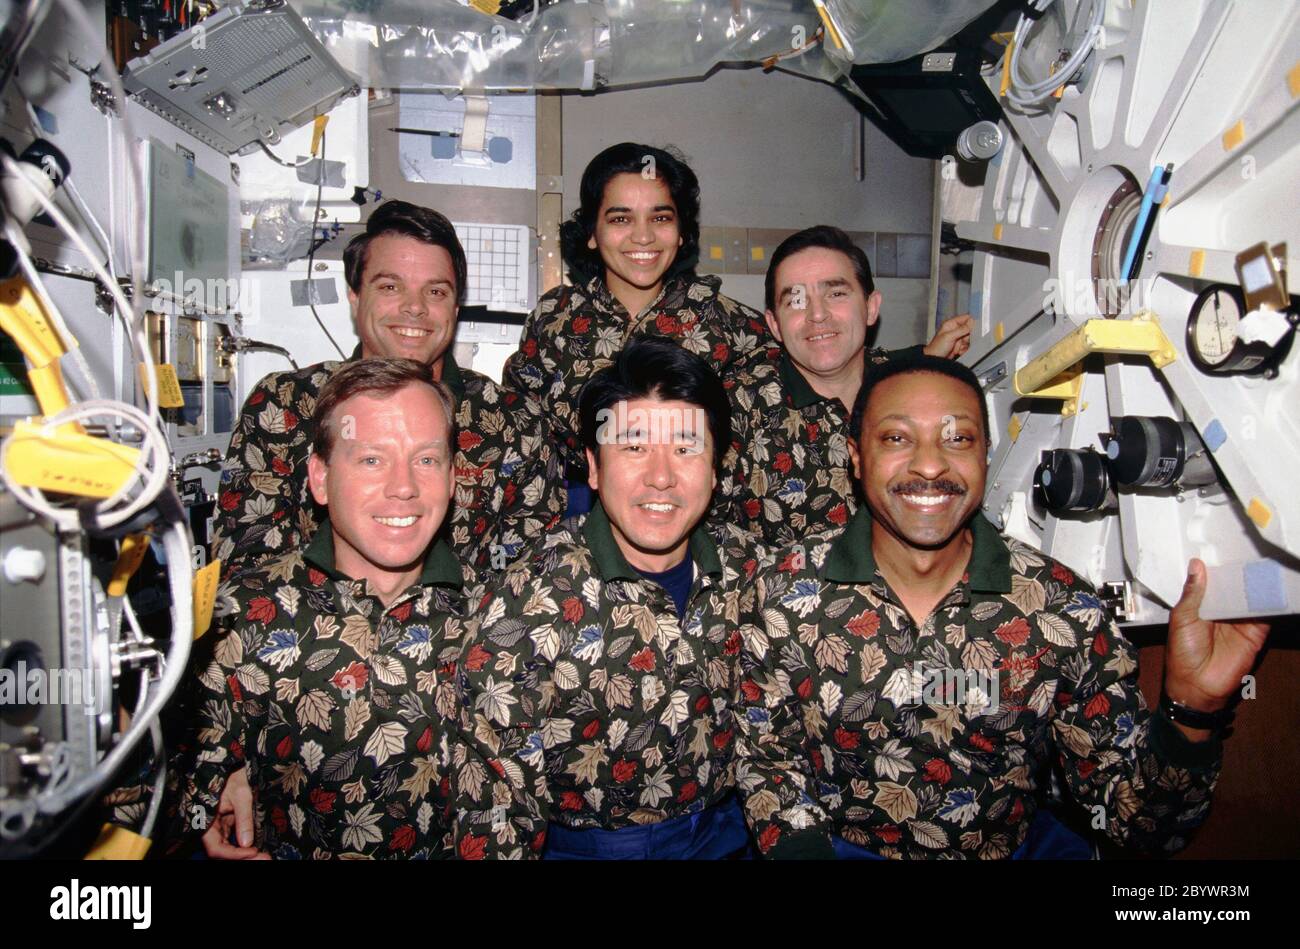 (19 November – 5 December 1997) --- One of the crew members' traditional in-flight crew portraits has them posed in other-than traditional attire on the Space Shuttle Columbia's mid-deck.  On the front row, from the left, are astronauts Steven W. Lindsey, pilot; Takao Doi, an international mission specialist representing Japan's National Space Development Agency (NASDA); and Winston E. Scott, mission specialist.  In the back are astronauts Kevin R. Kregel, mission commander; and Kalpana Chawla, mission specialist, along with Ukrainian payload specialist Leonid K. Kadenyuk. Stock Photo